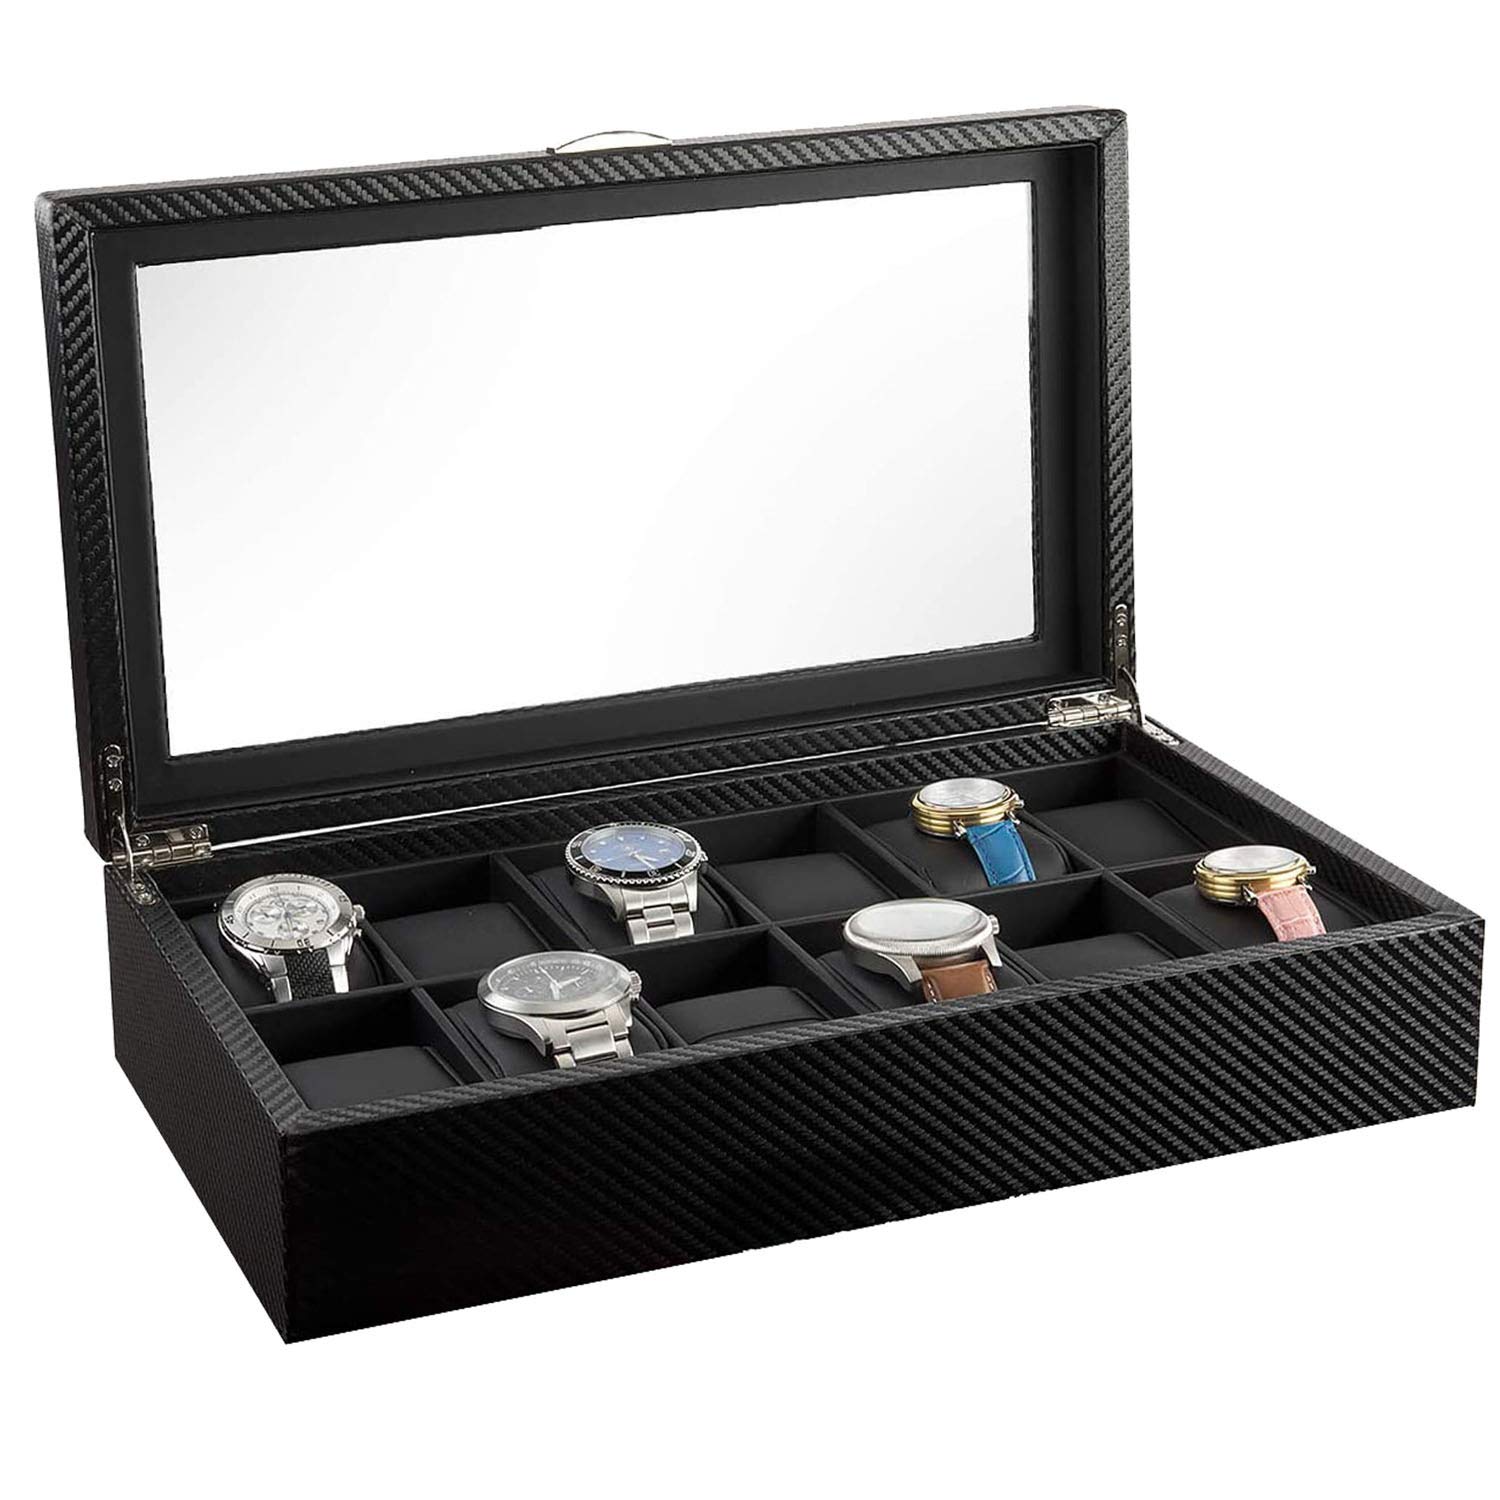 HAUTEROW Watch Box- Display Case & Organizer For Men| First-Class Jewelry Watch Holder| 12 Watch Slots| Sleek Black Color, Glass Top, Carbon Fiber, & Faux Leather